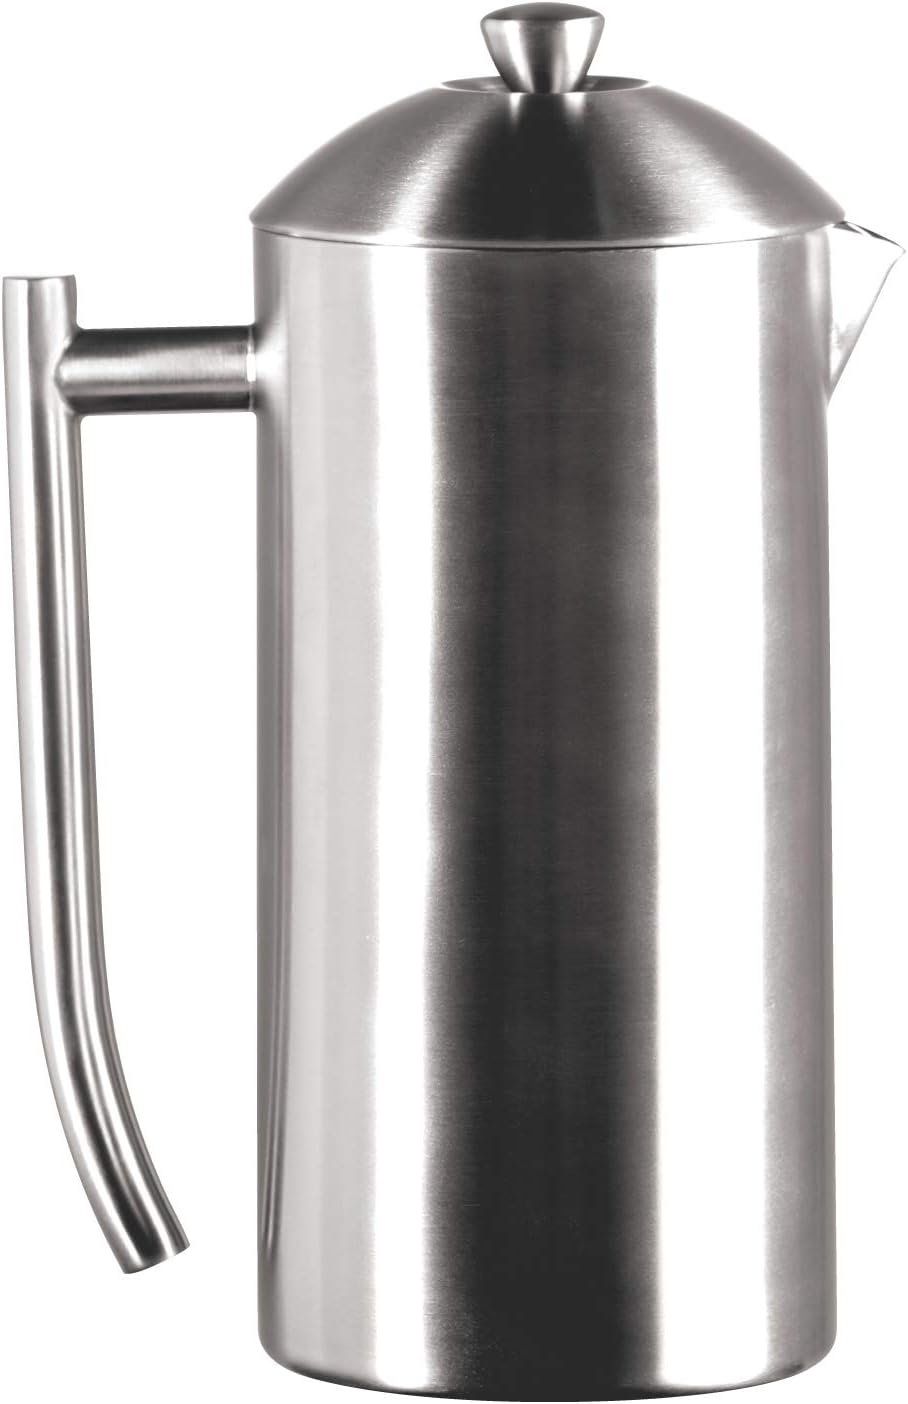 Double-Walled Stainless-Steel French Press Coffee Maker